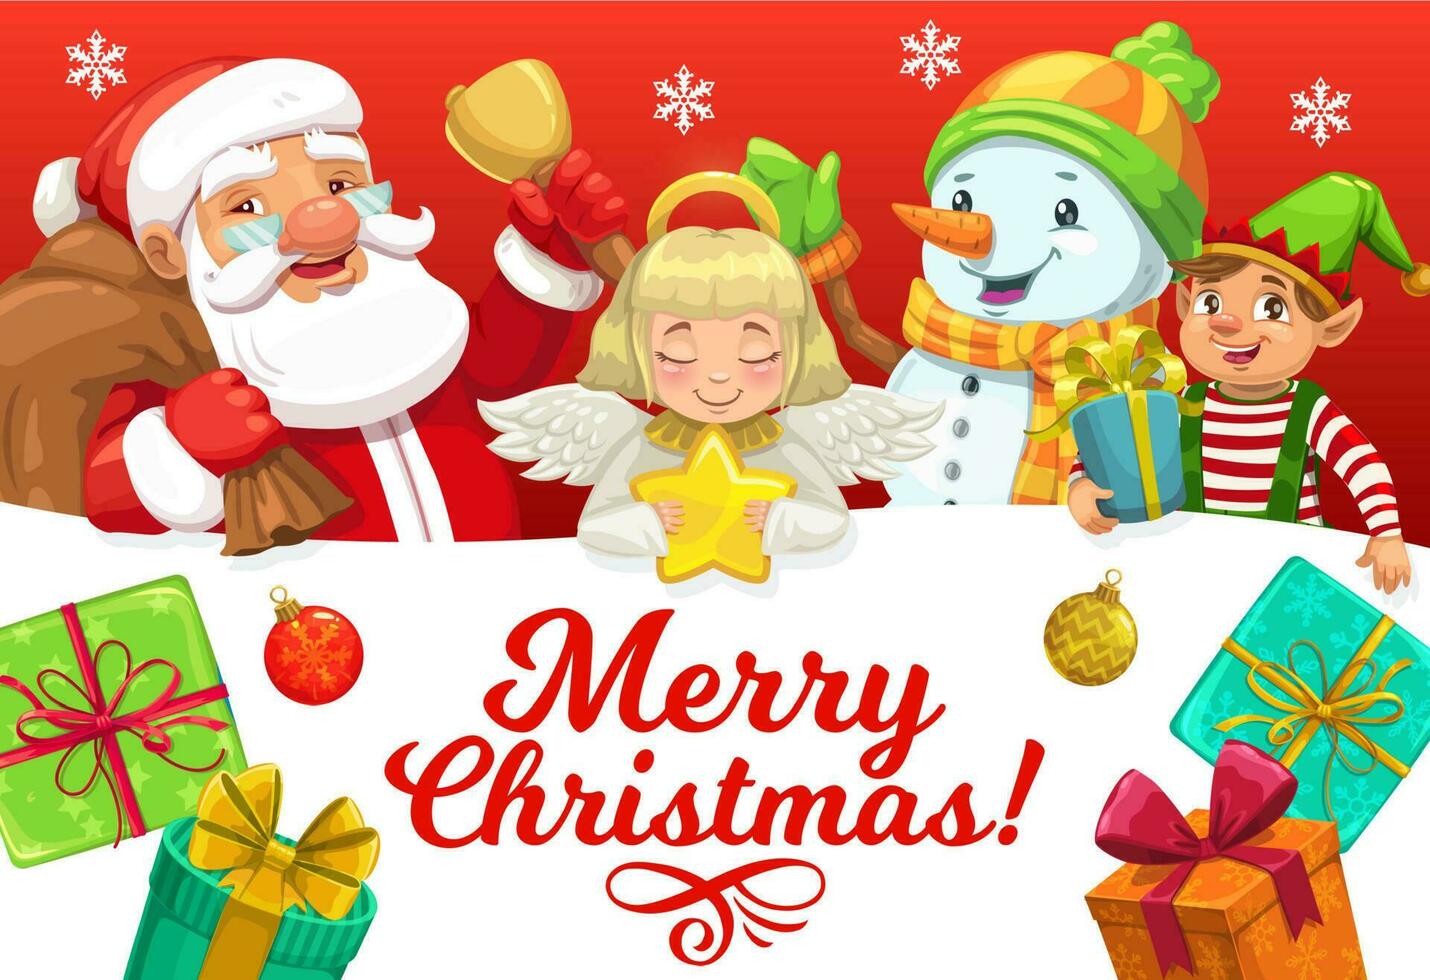 Santa, snowman, elf and angel with Christmas gifts vector